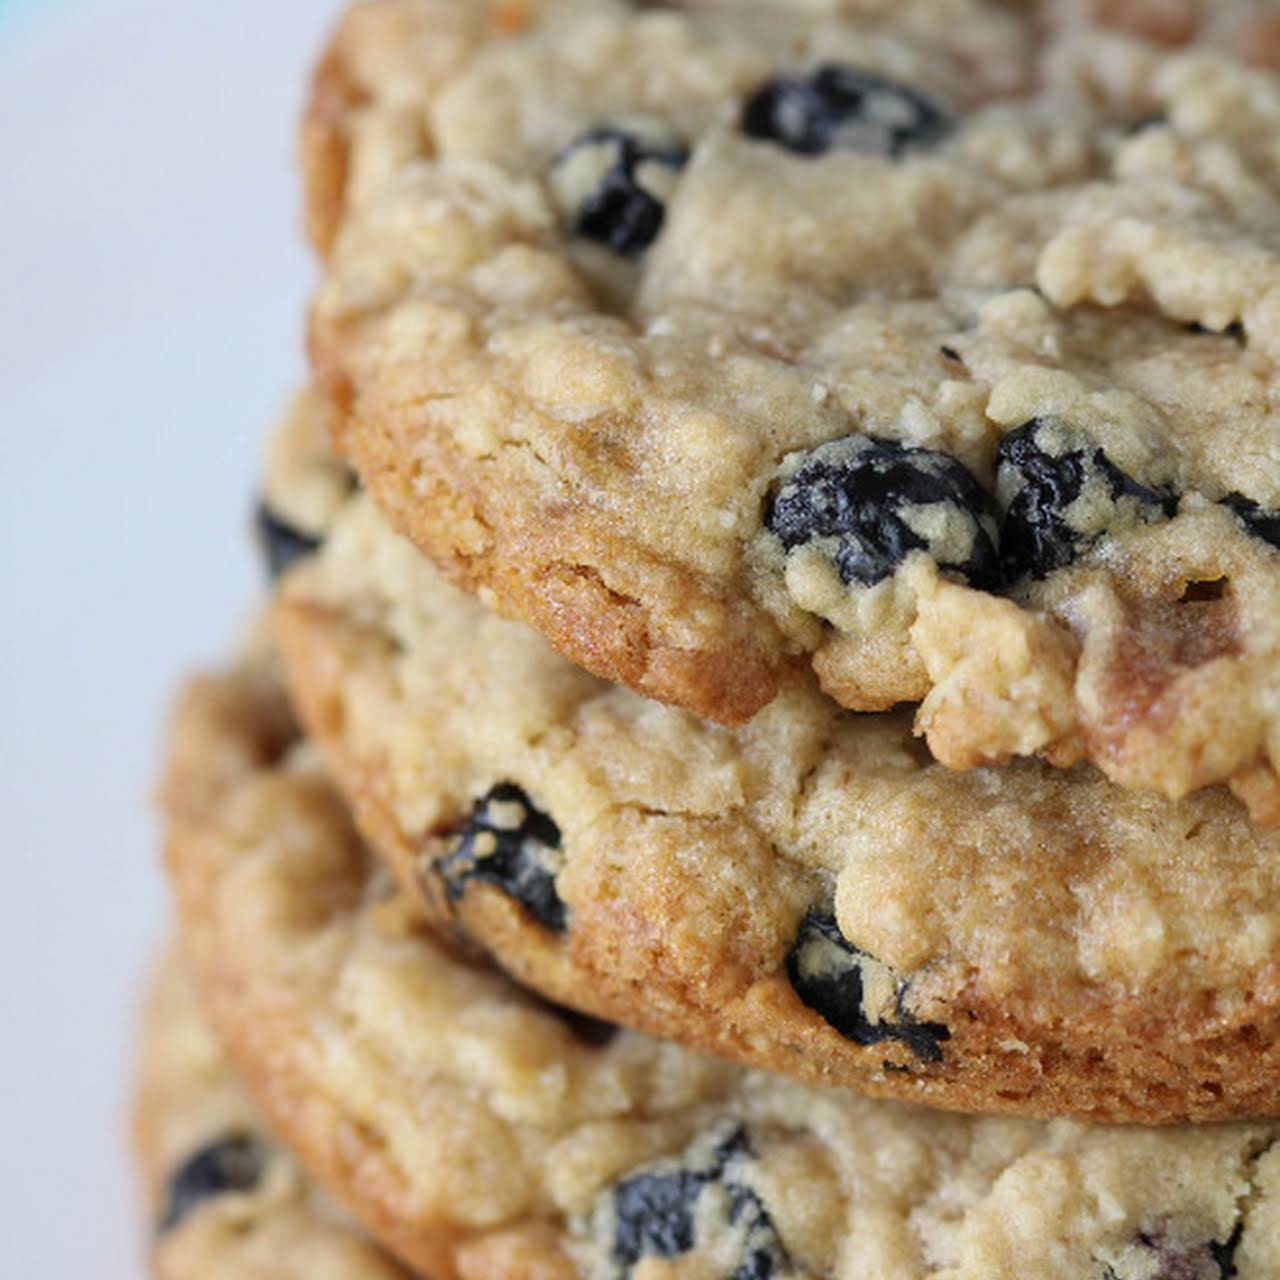 Blueberry, Caramel and White Chocolate Oatmeal Cookies